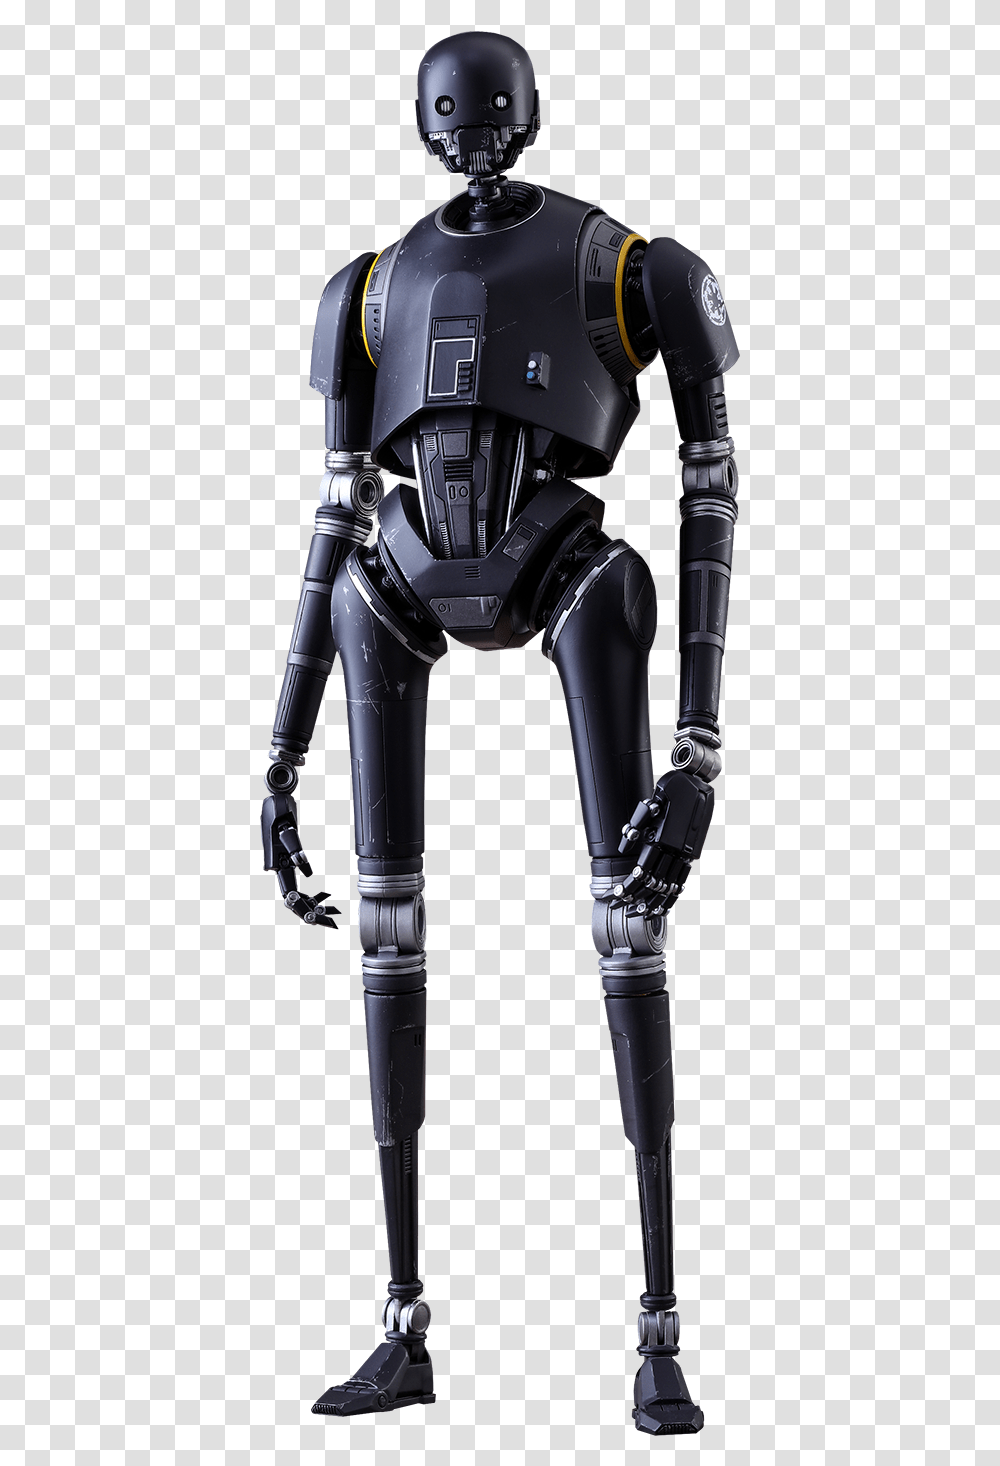 Rpggamerorg Characters D6 Galactic Emperor Sheev Imperial Droid Star Wars, Robot, Toy, Helmet, Clothing Transparent Png